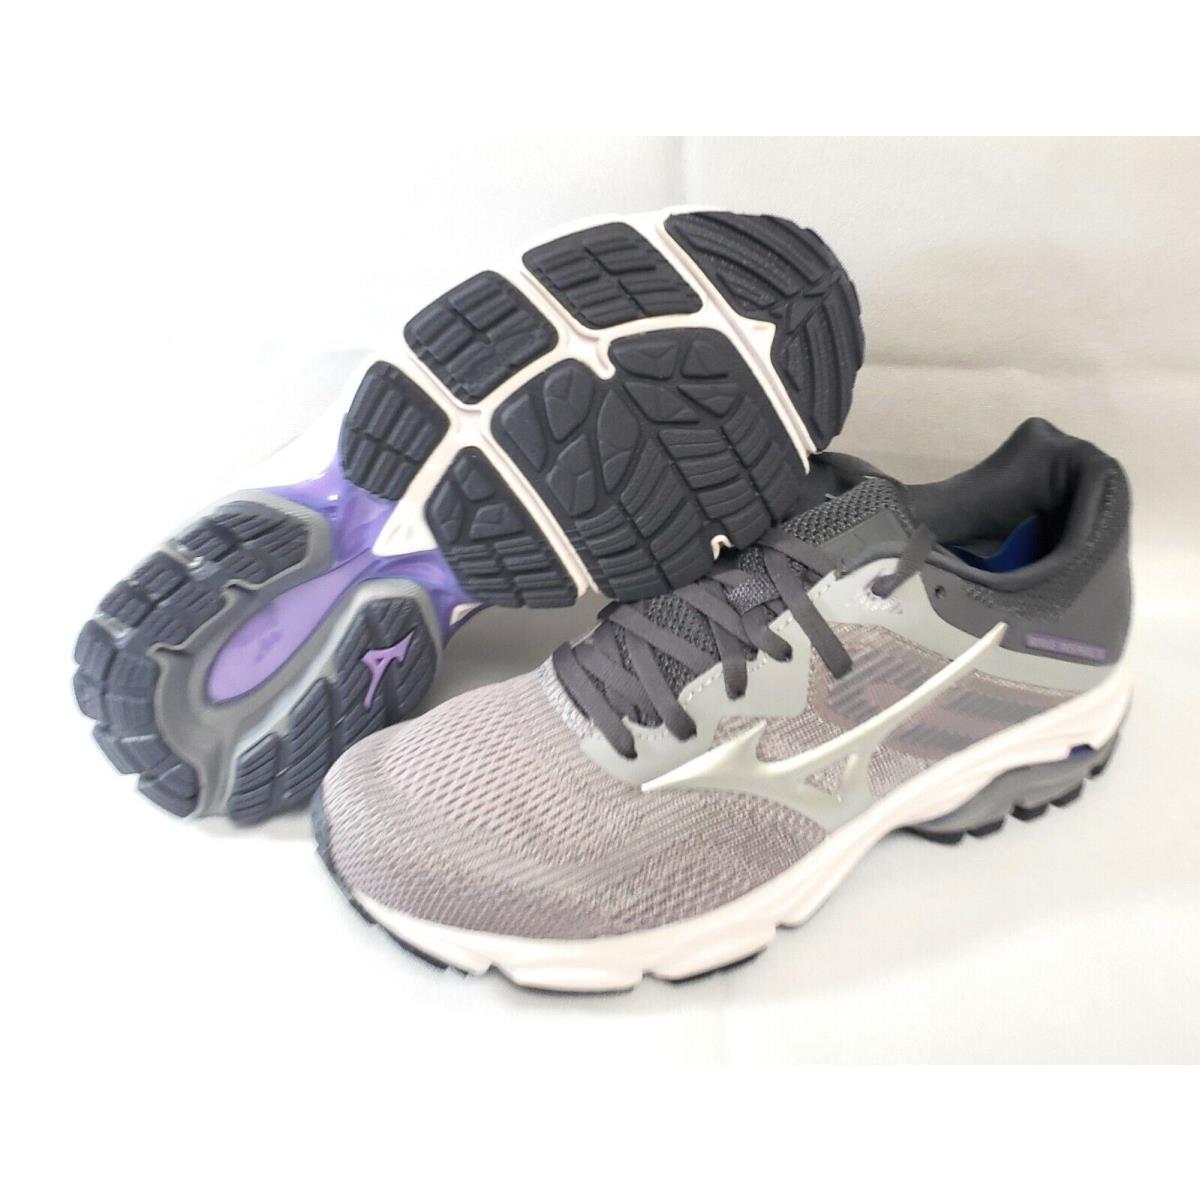 Womens Mizuno Wave Inspire 16 Silver Grey Wide D Athletic Running Sneakers Shoes